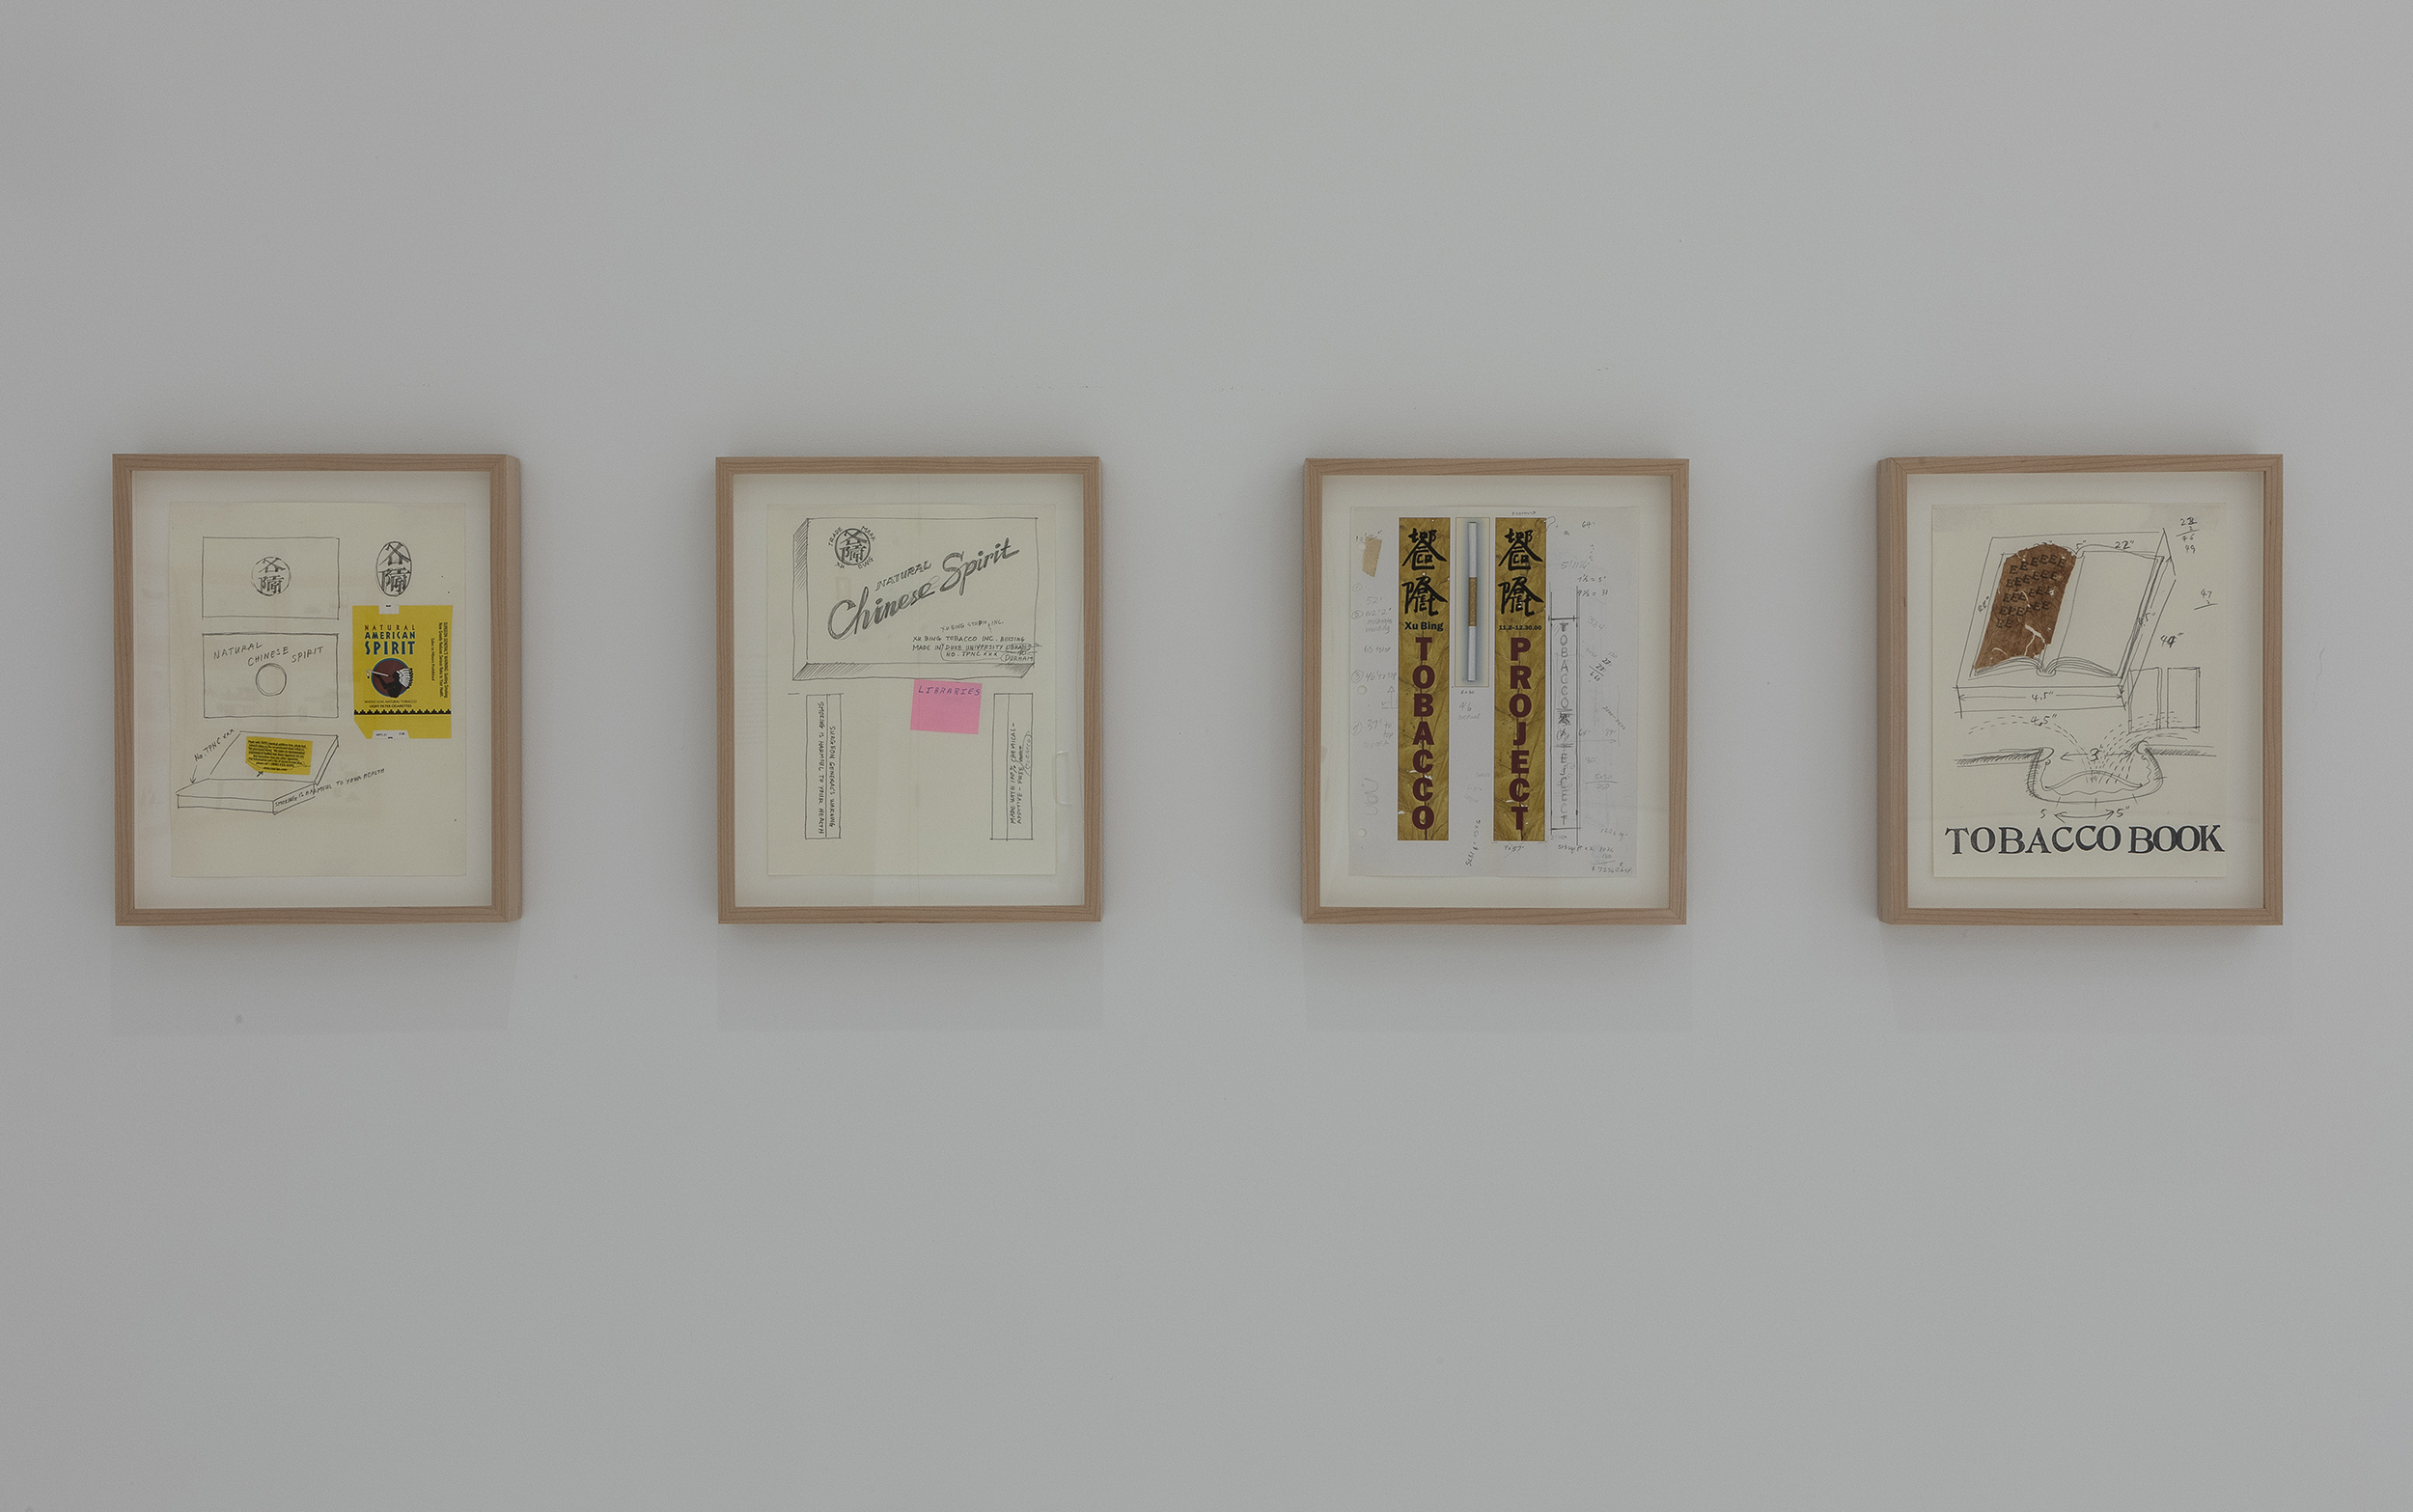 Left to right: Xu Bing, Study for Chinese Spirit I;Study for Chinese Spirit II; Study for Tobacco Project; and Study for Tobacco Book, 1999–2000